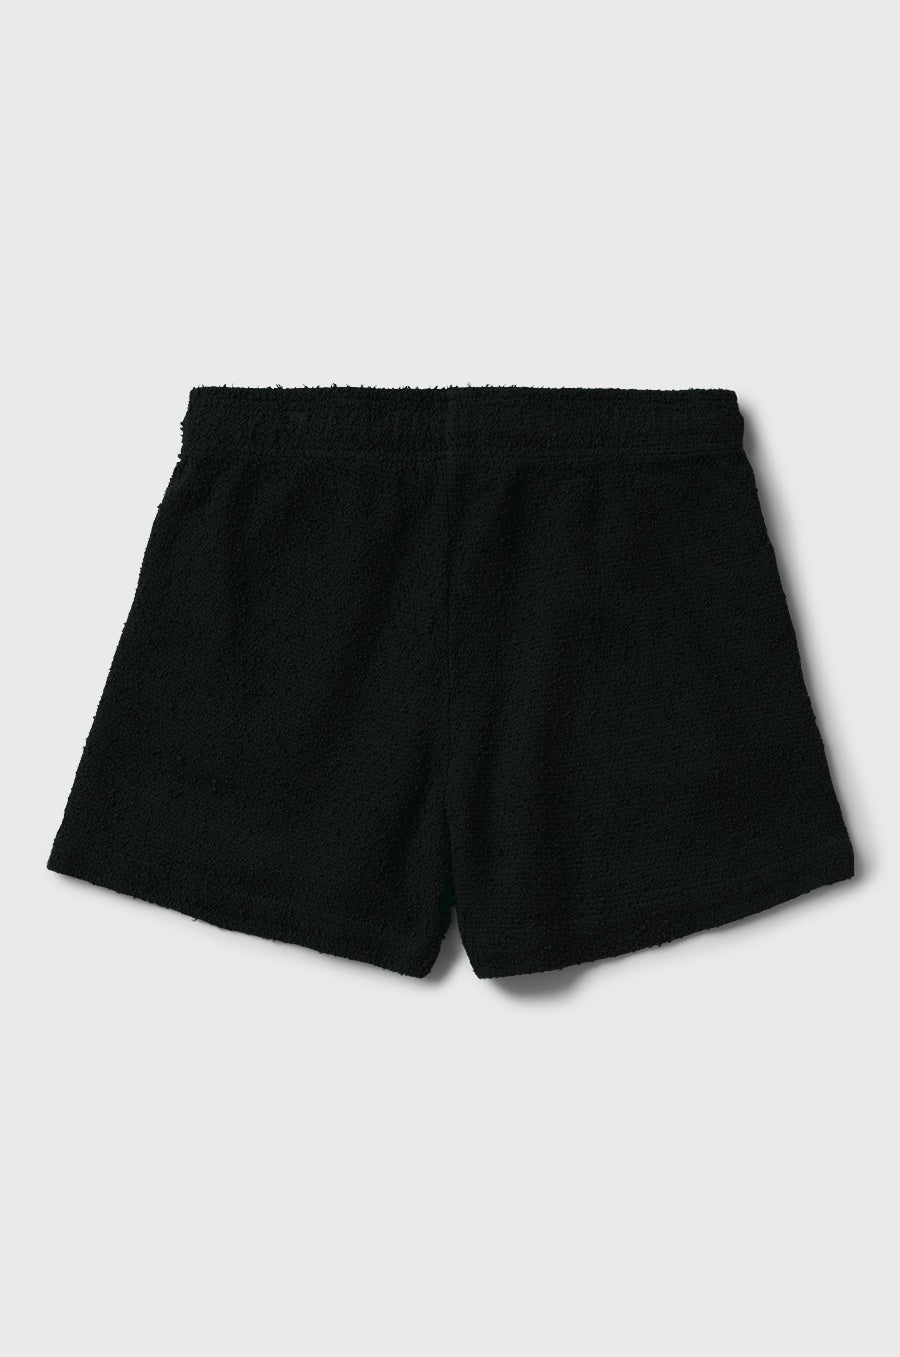 the lady & the sailor Weekend Short in Black Boucle.